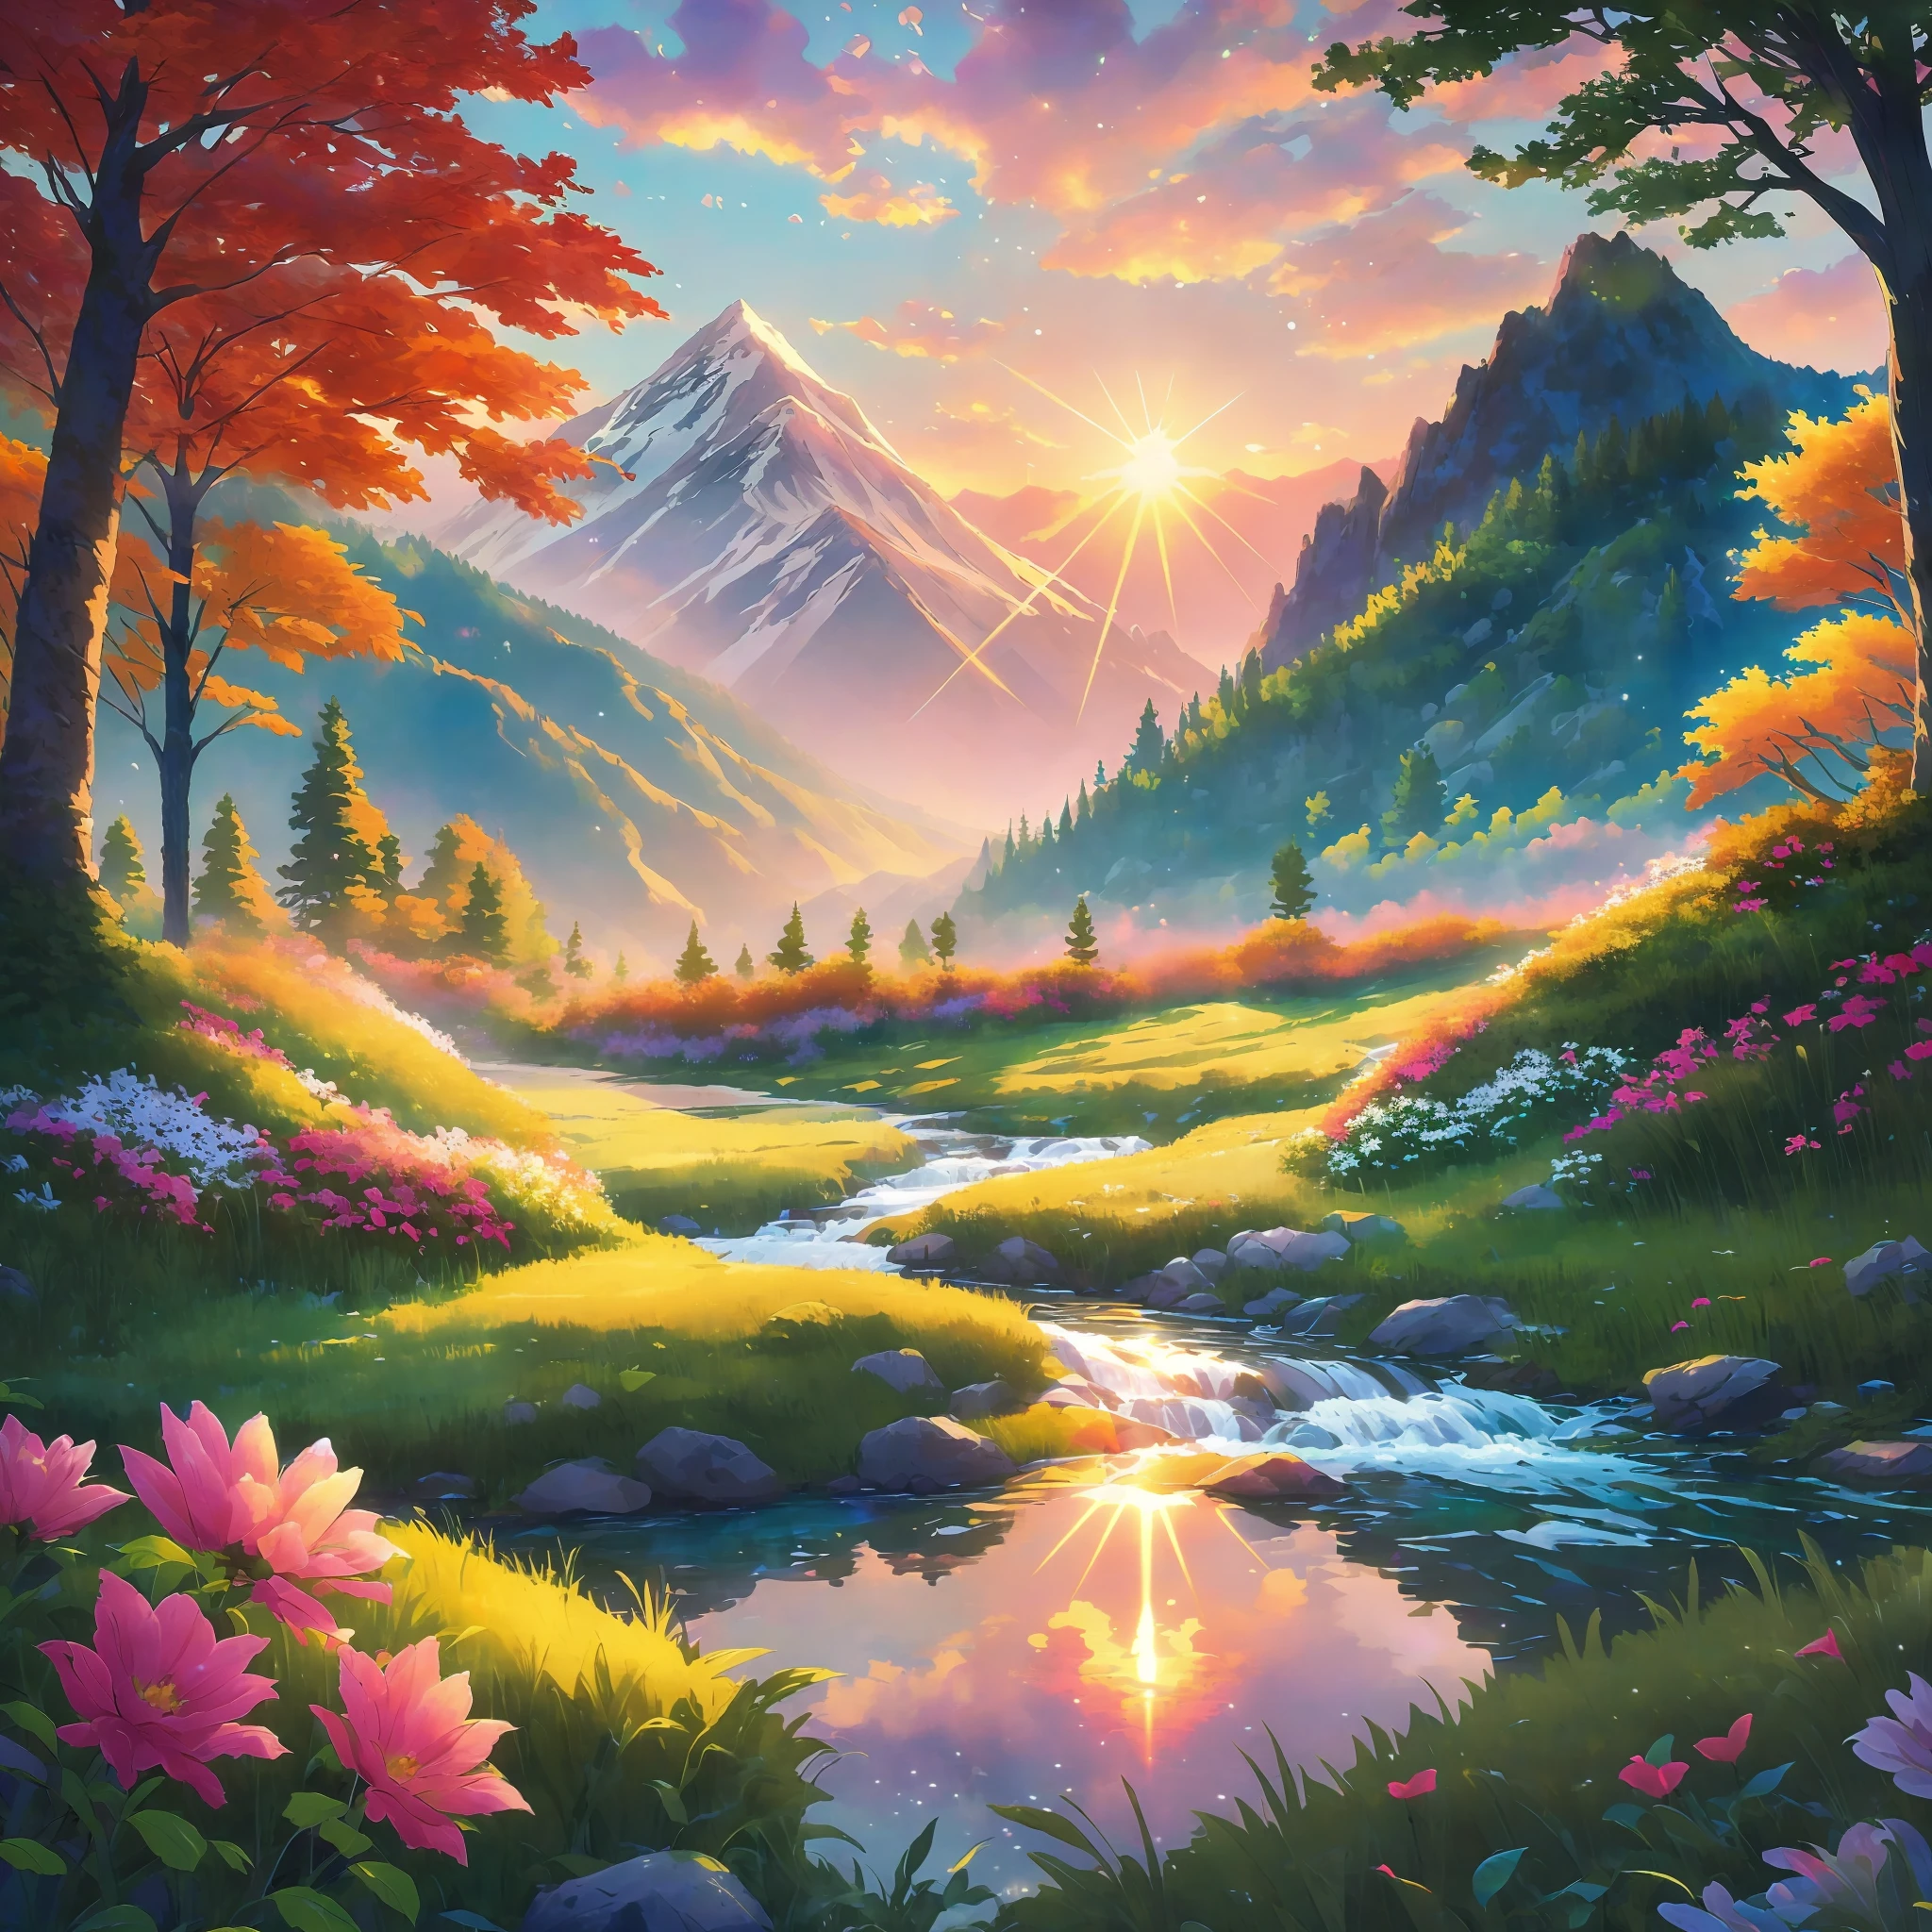 (best illumination, best shadow), scenic anime landscape, beautiful nature scenery, breathtaking view, majestic mountains, lush greenery, flowing streams and rivers, colorful flora and fauna, peaceful atmosphere, magical sunset.